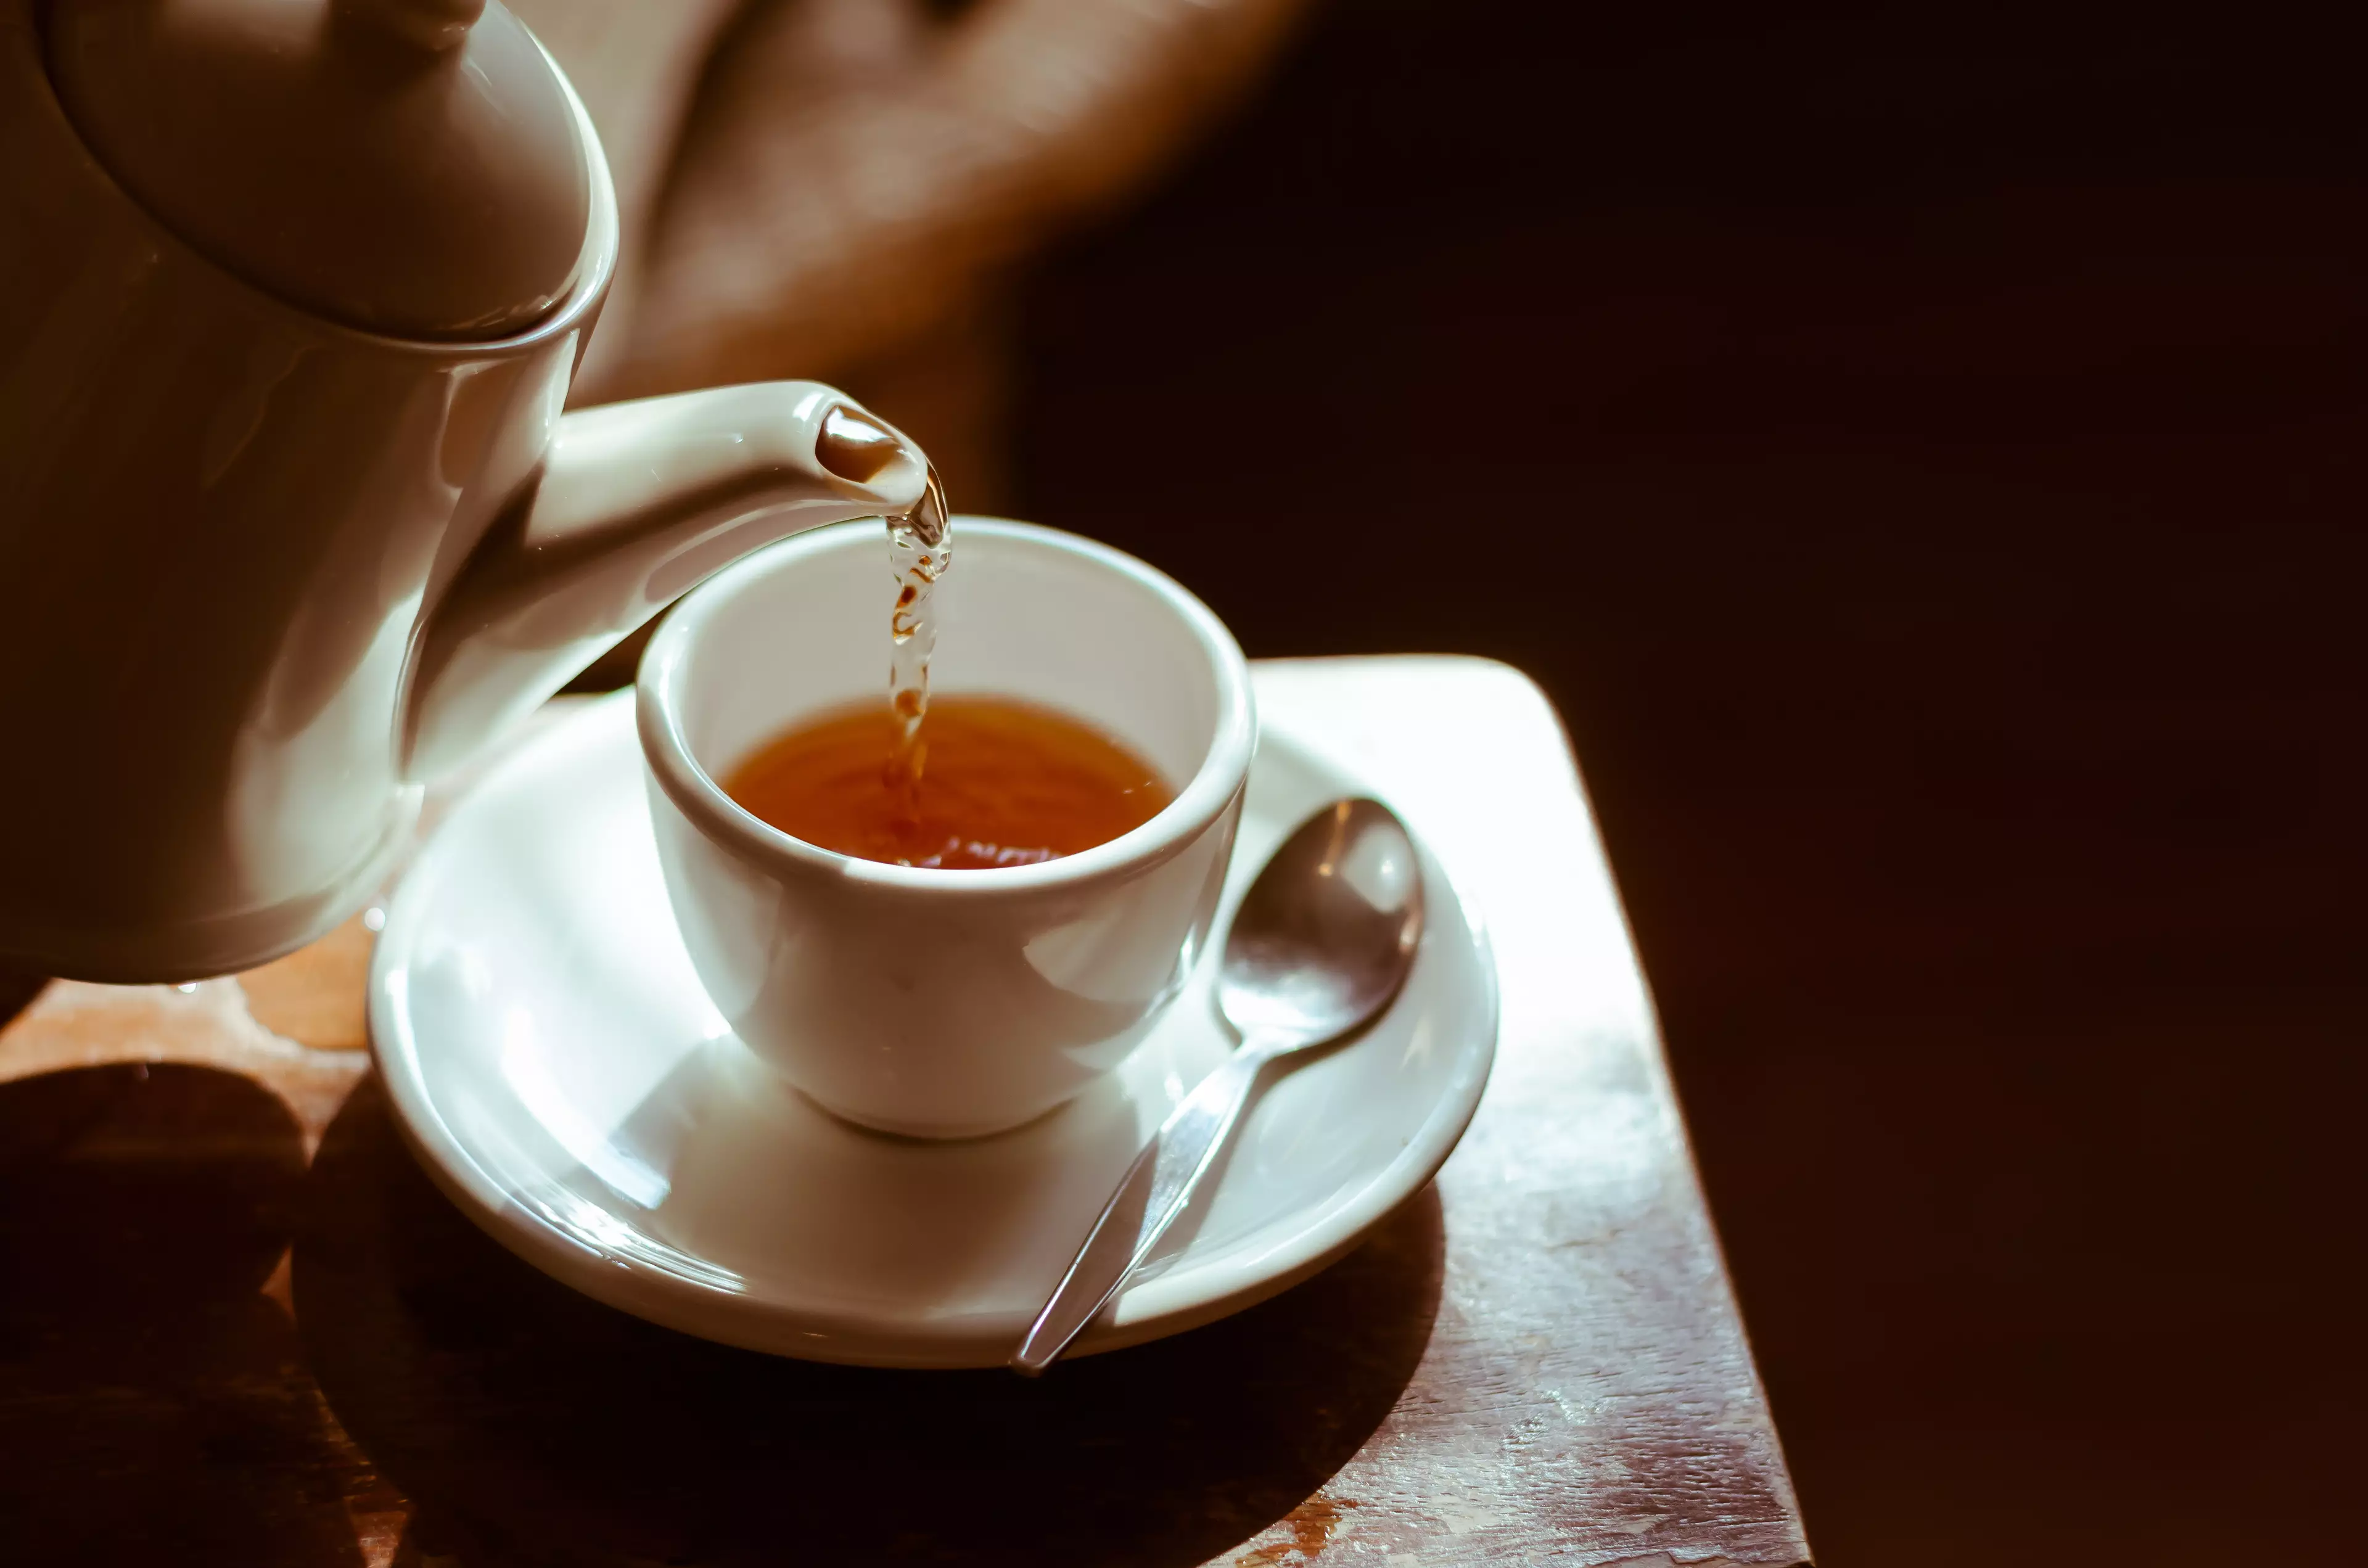 The tea shortage is a crisis for brew loving Brits (